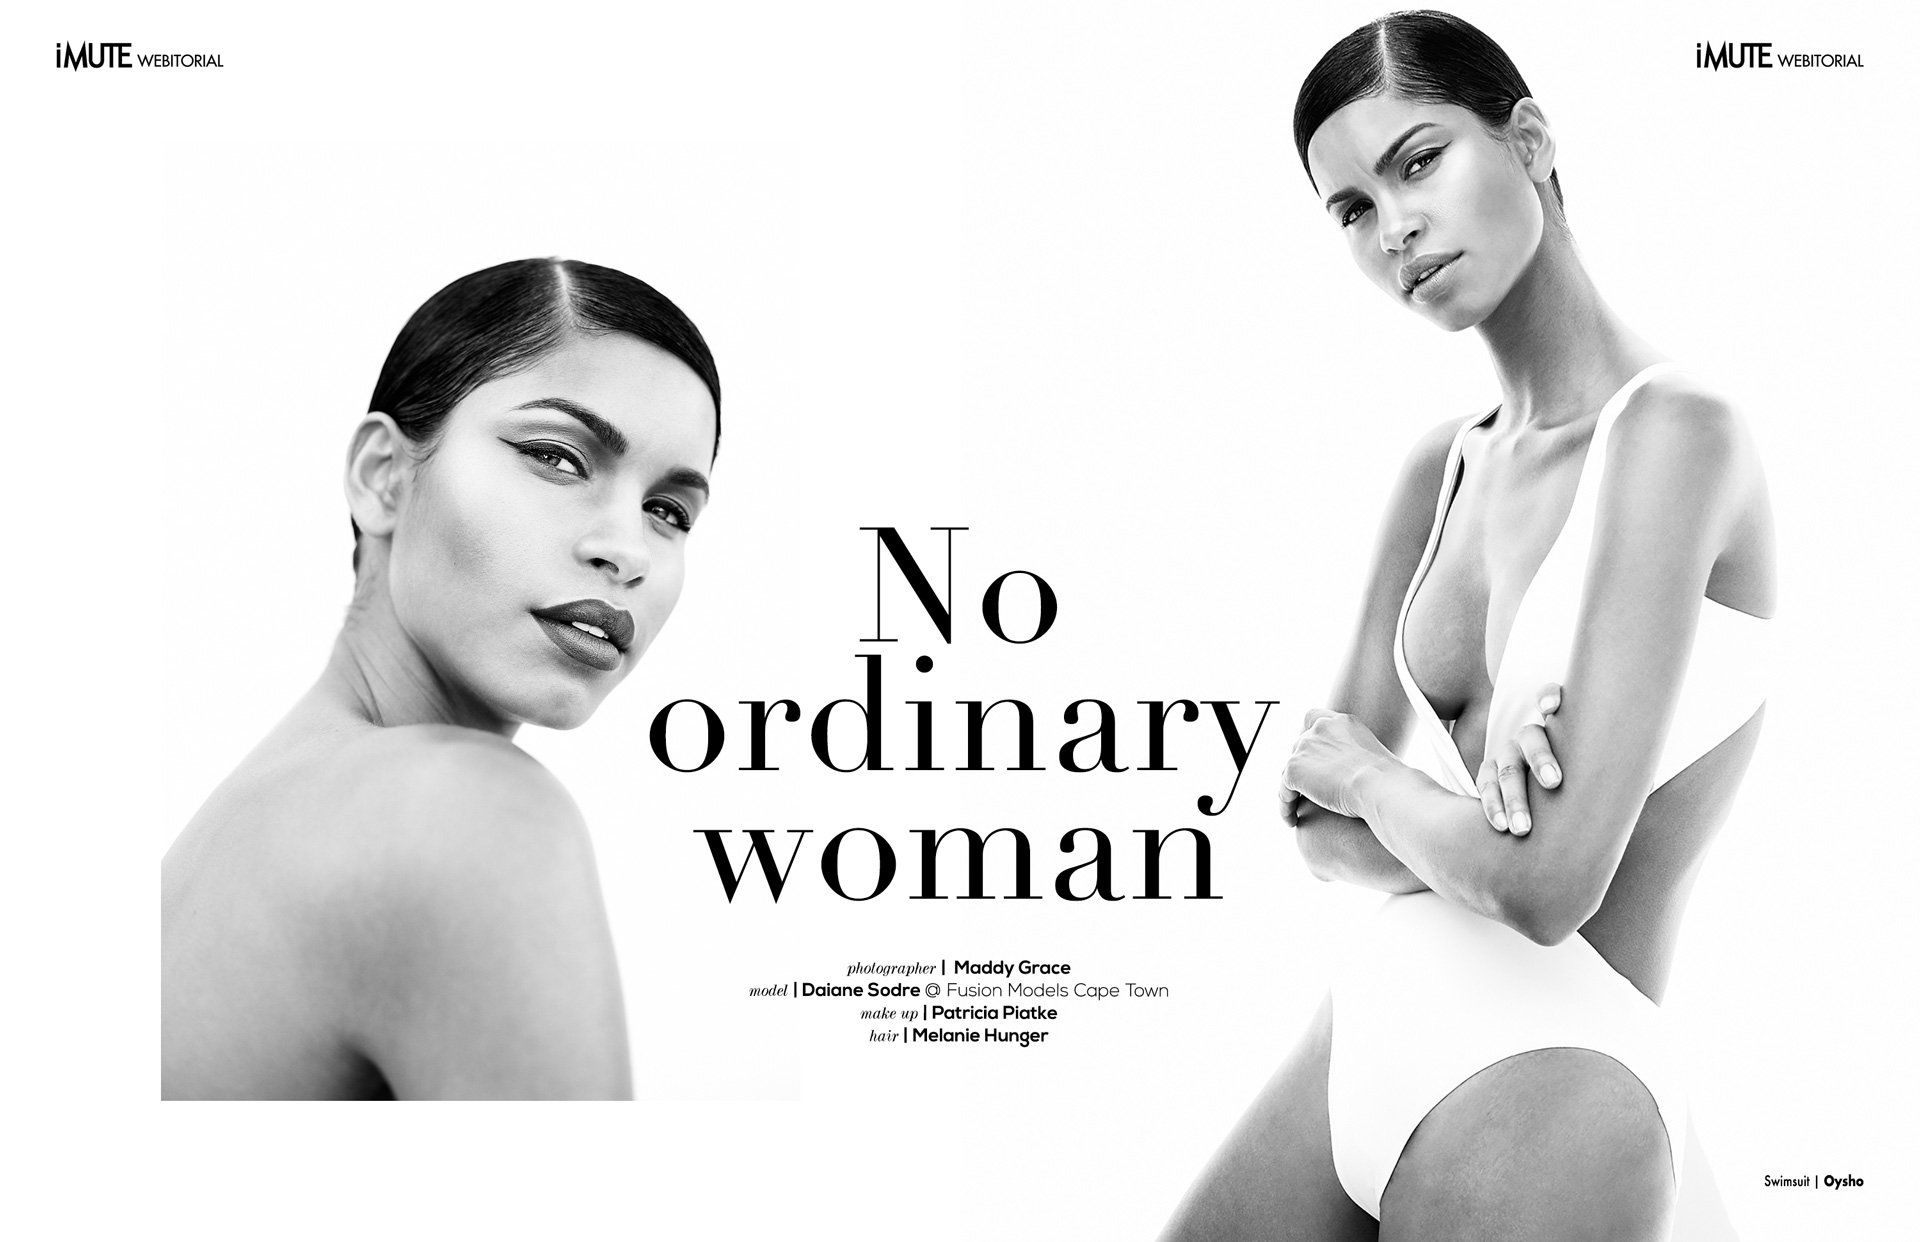 No ordinary woman webitorial for iMute Magazine Photographer | Maddy Grace Model | Daiane Sodre @ Fusion Models Cape Town Makeup | Patricia Piatke Hair | Melanie Hunger